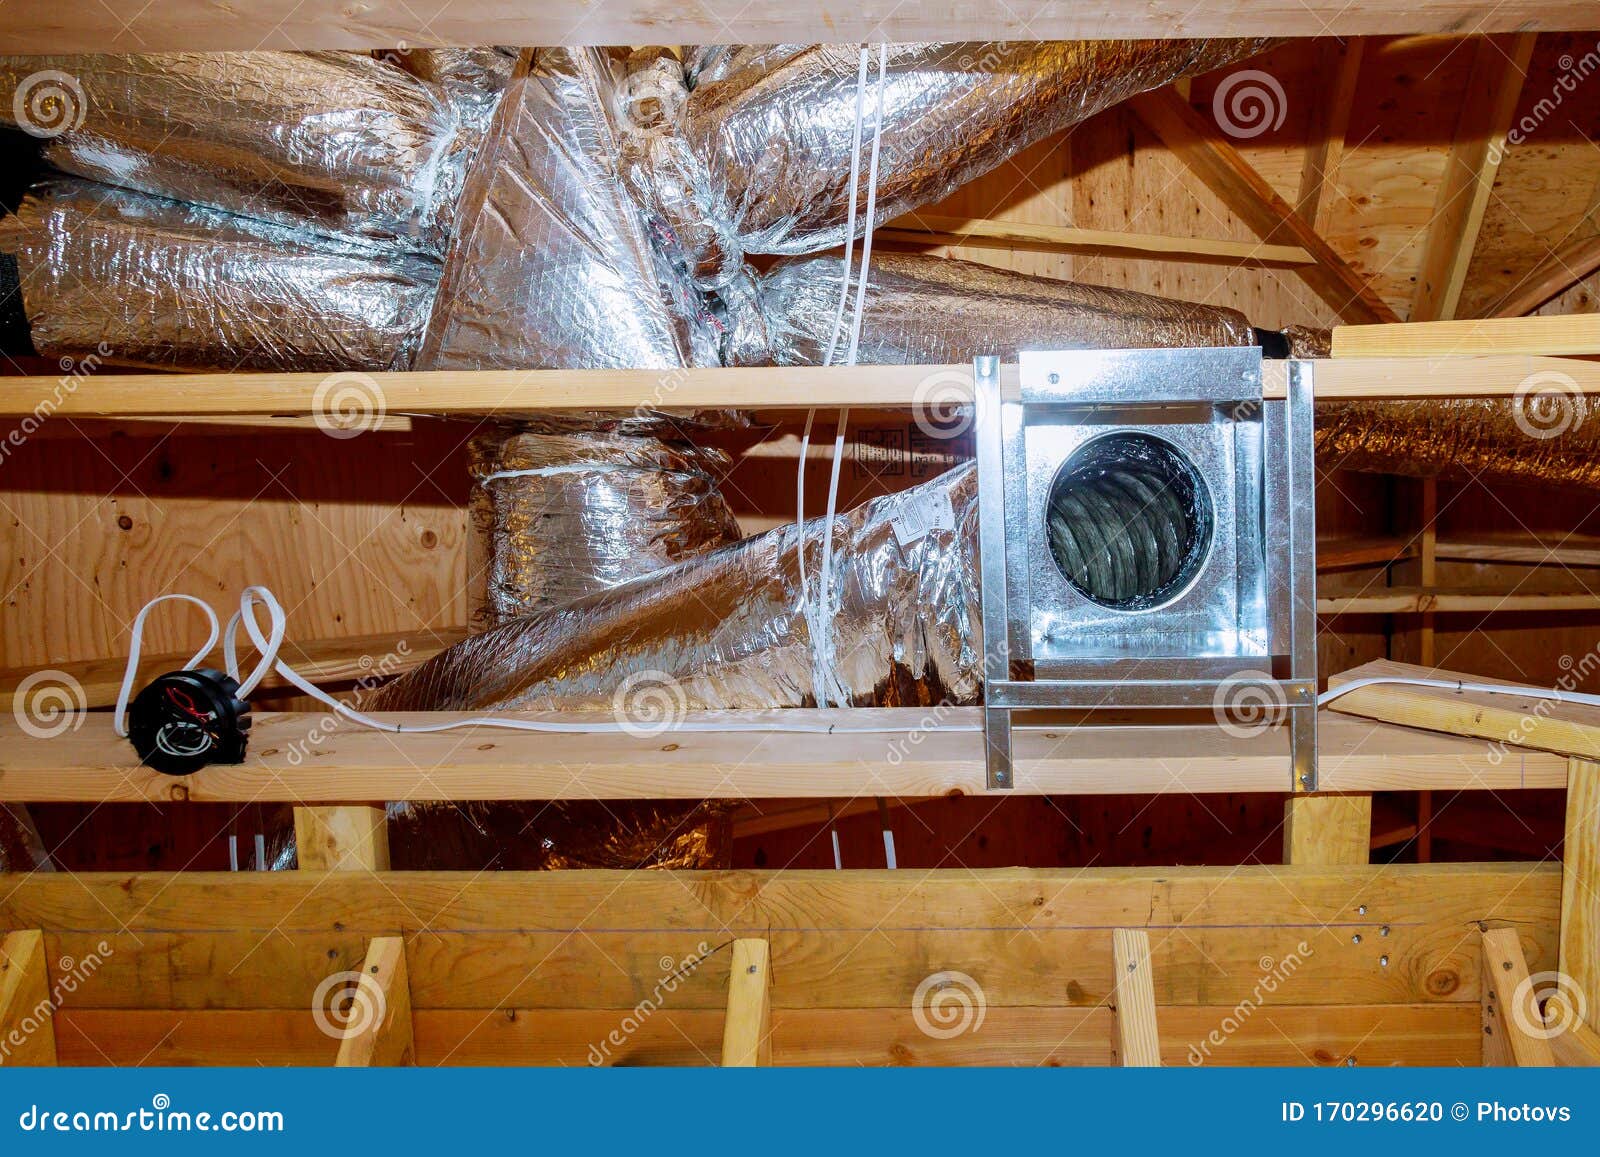 Construction New Home With Installed Of HVAC Vent In Roofing Stock Photo Image of conditioner